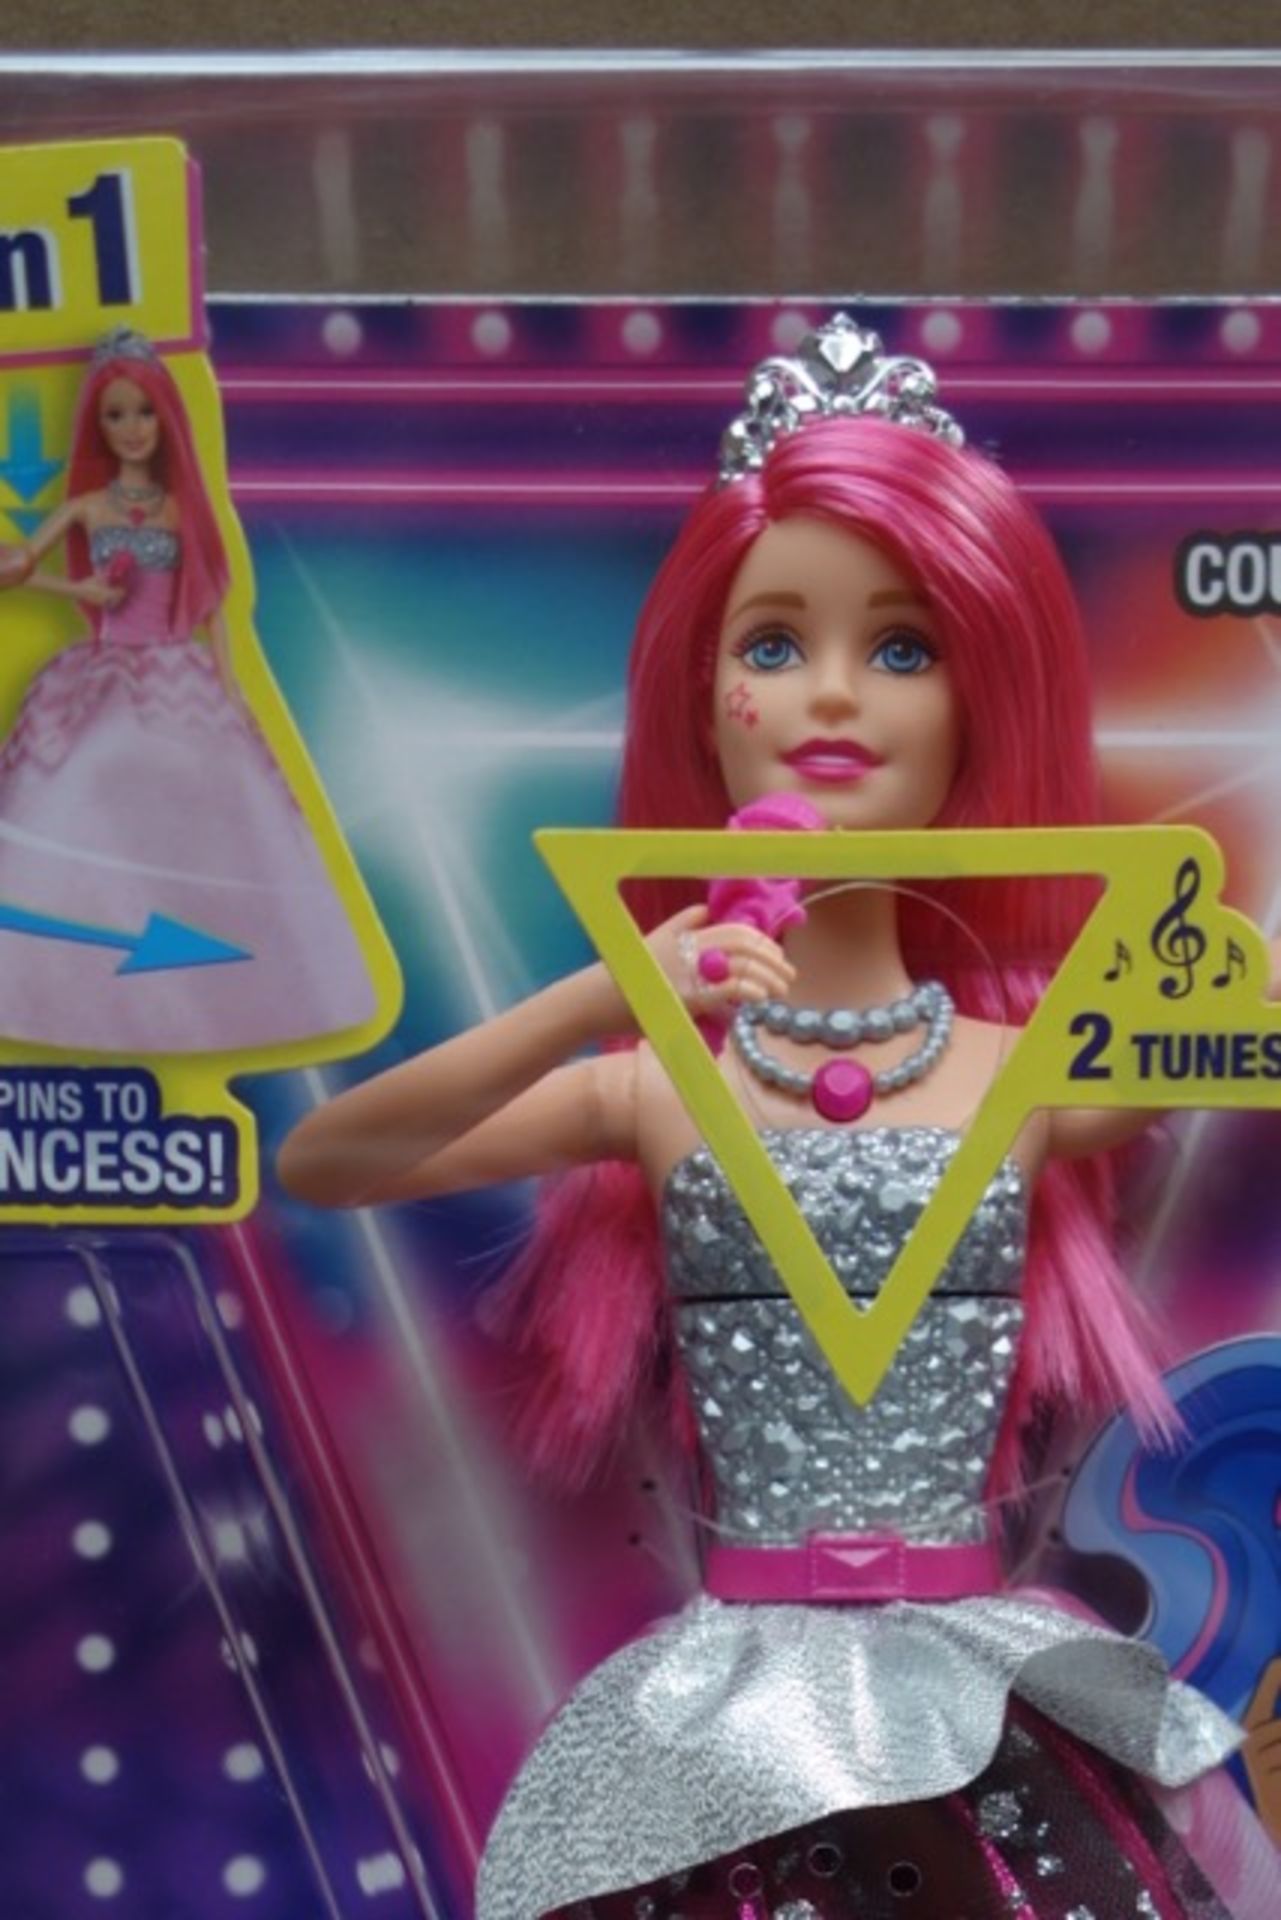 12 x Brand New - Barbie Rock 'n Royals 2 in 1 Doll - Courney. - Image 2 of 3